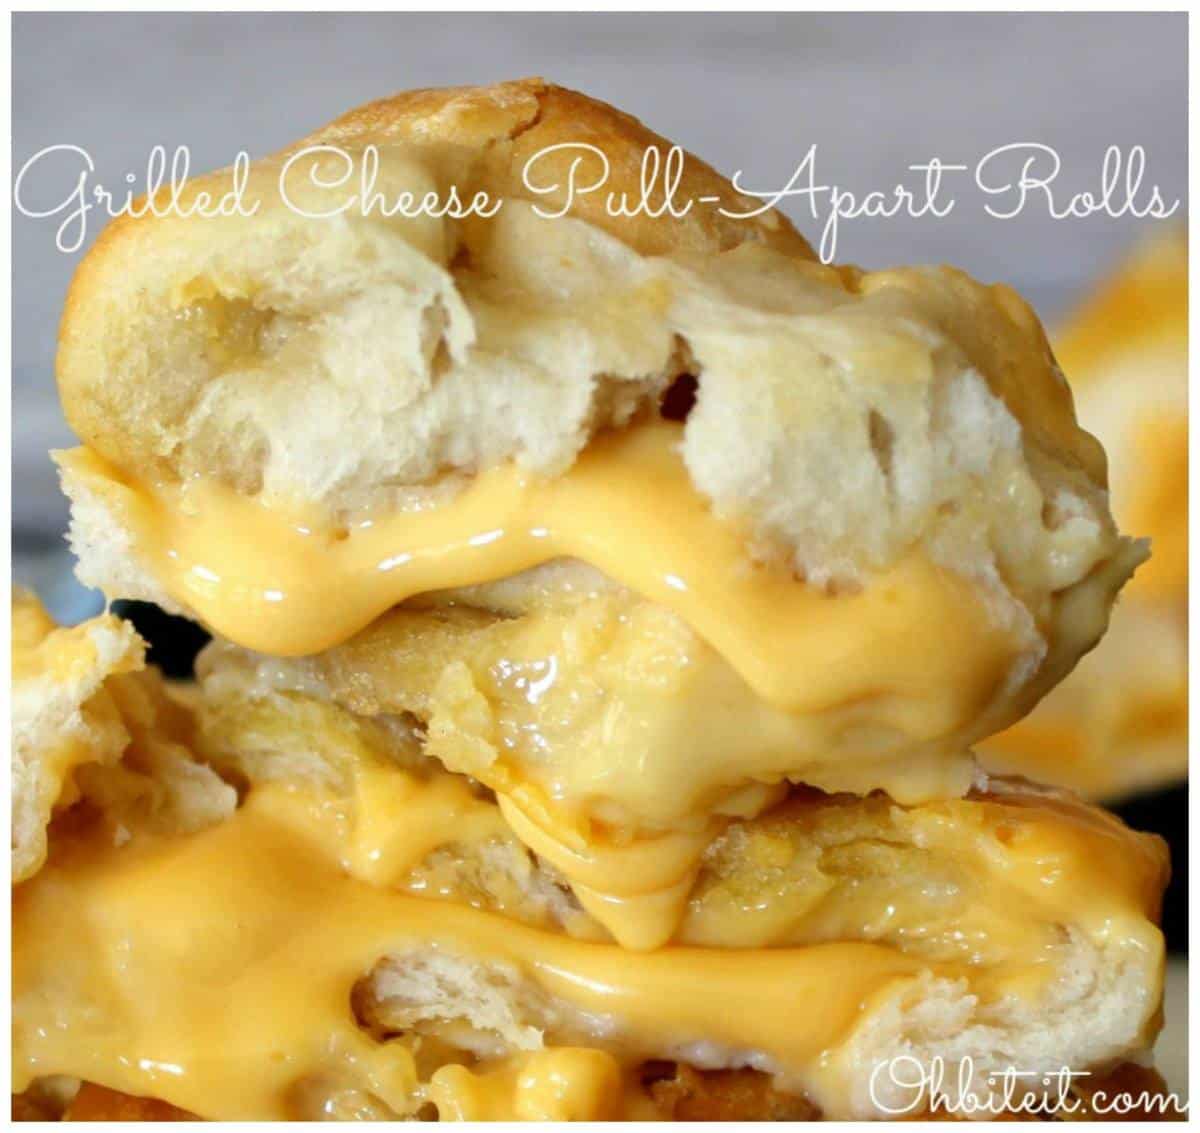 Grilled cheese pull-apart rolls